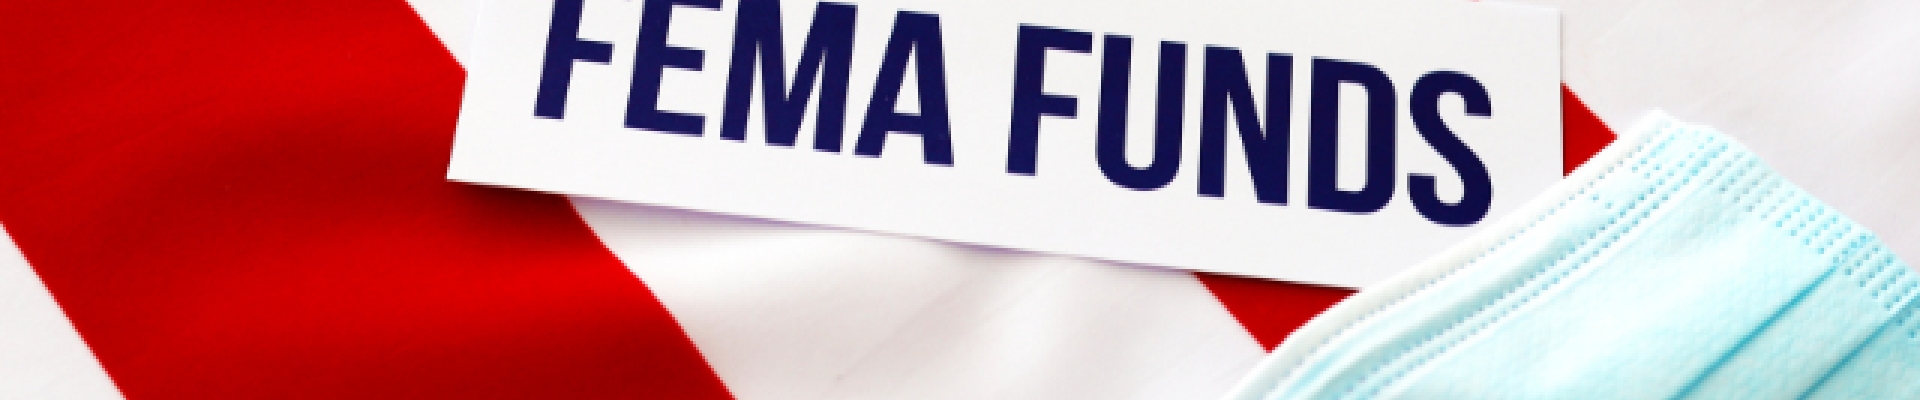 sign reading "FEMA Funds" with american flag in background